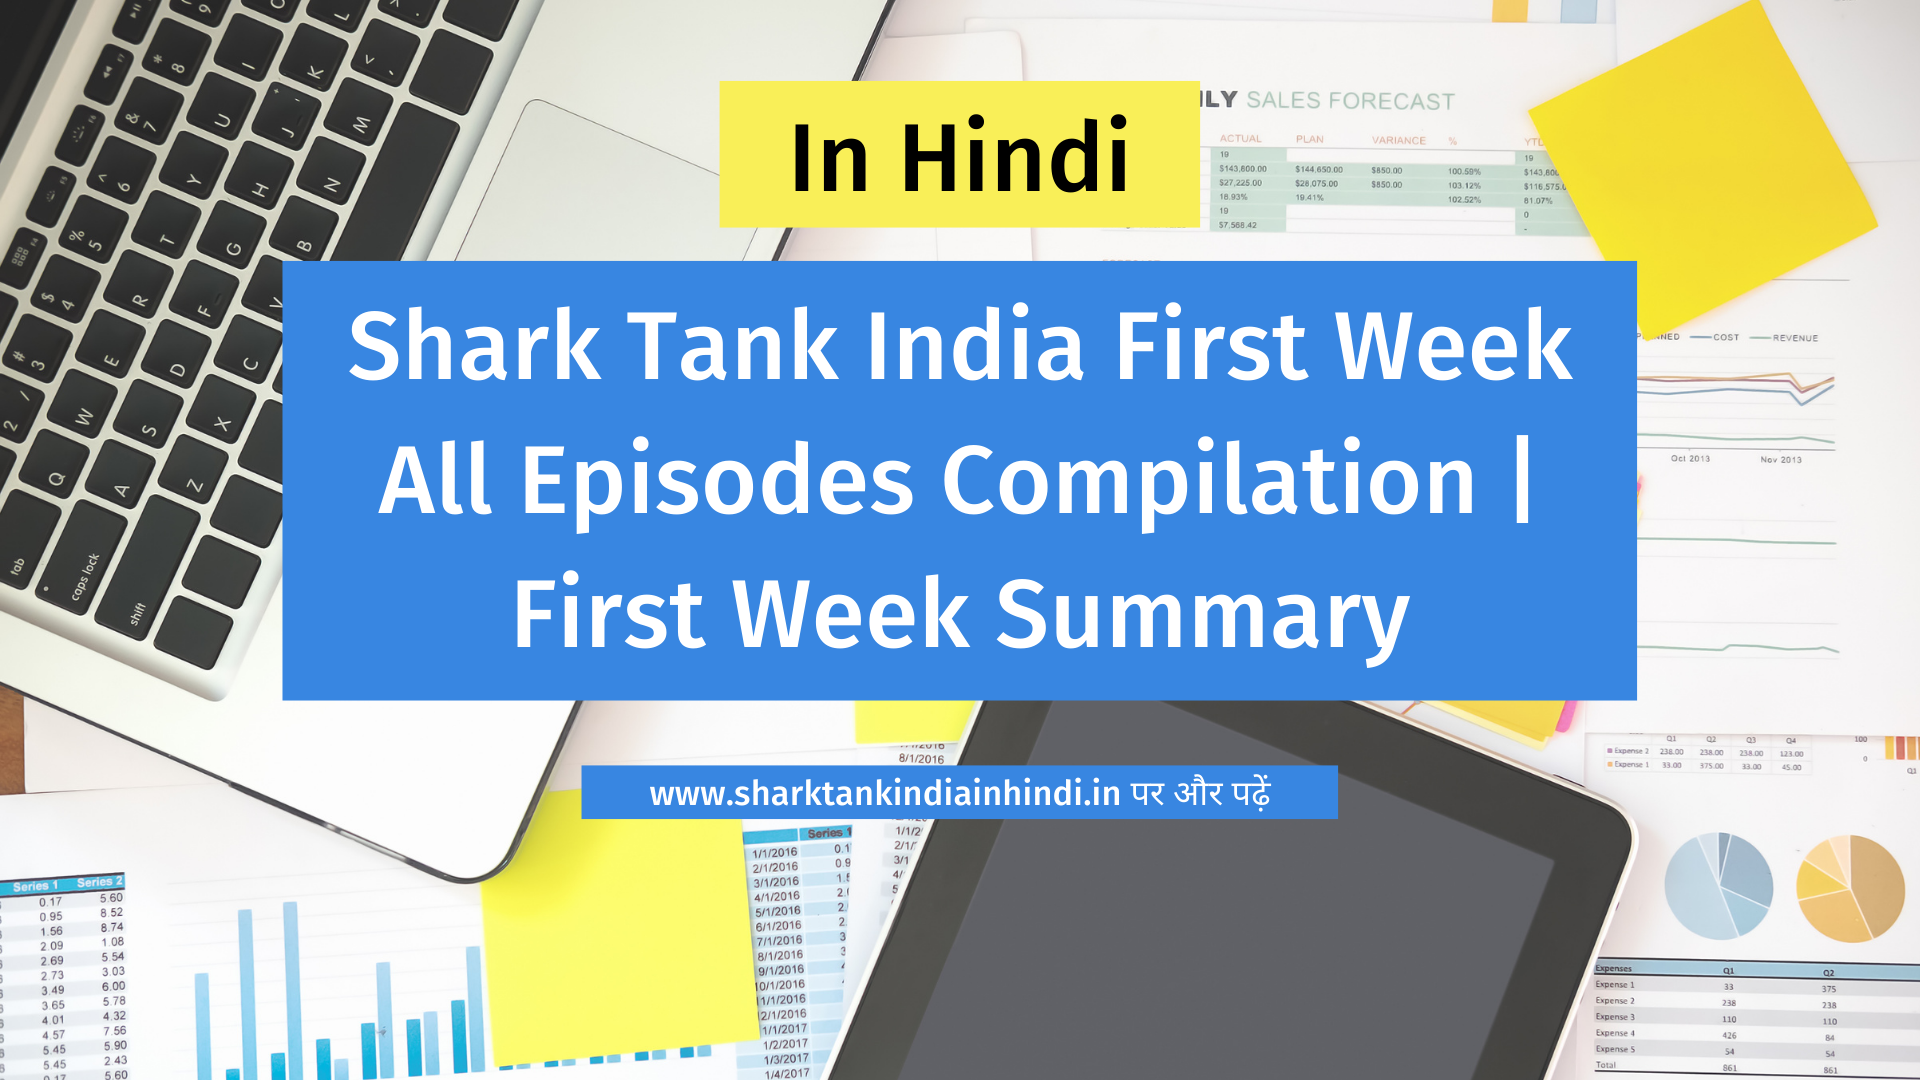 Shark Tank India First Week All Episodes Compilation First Week Summary